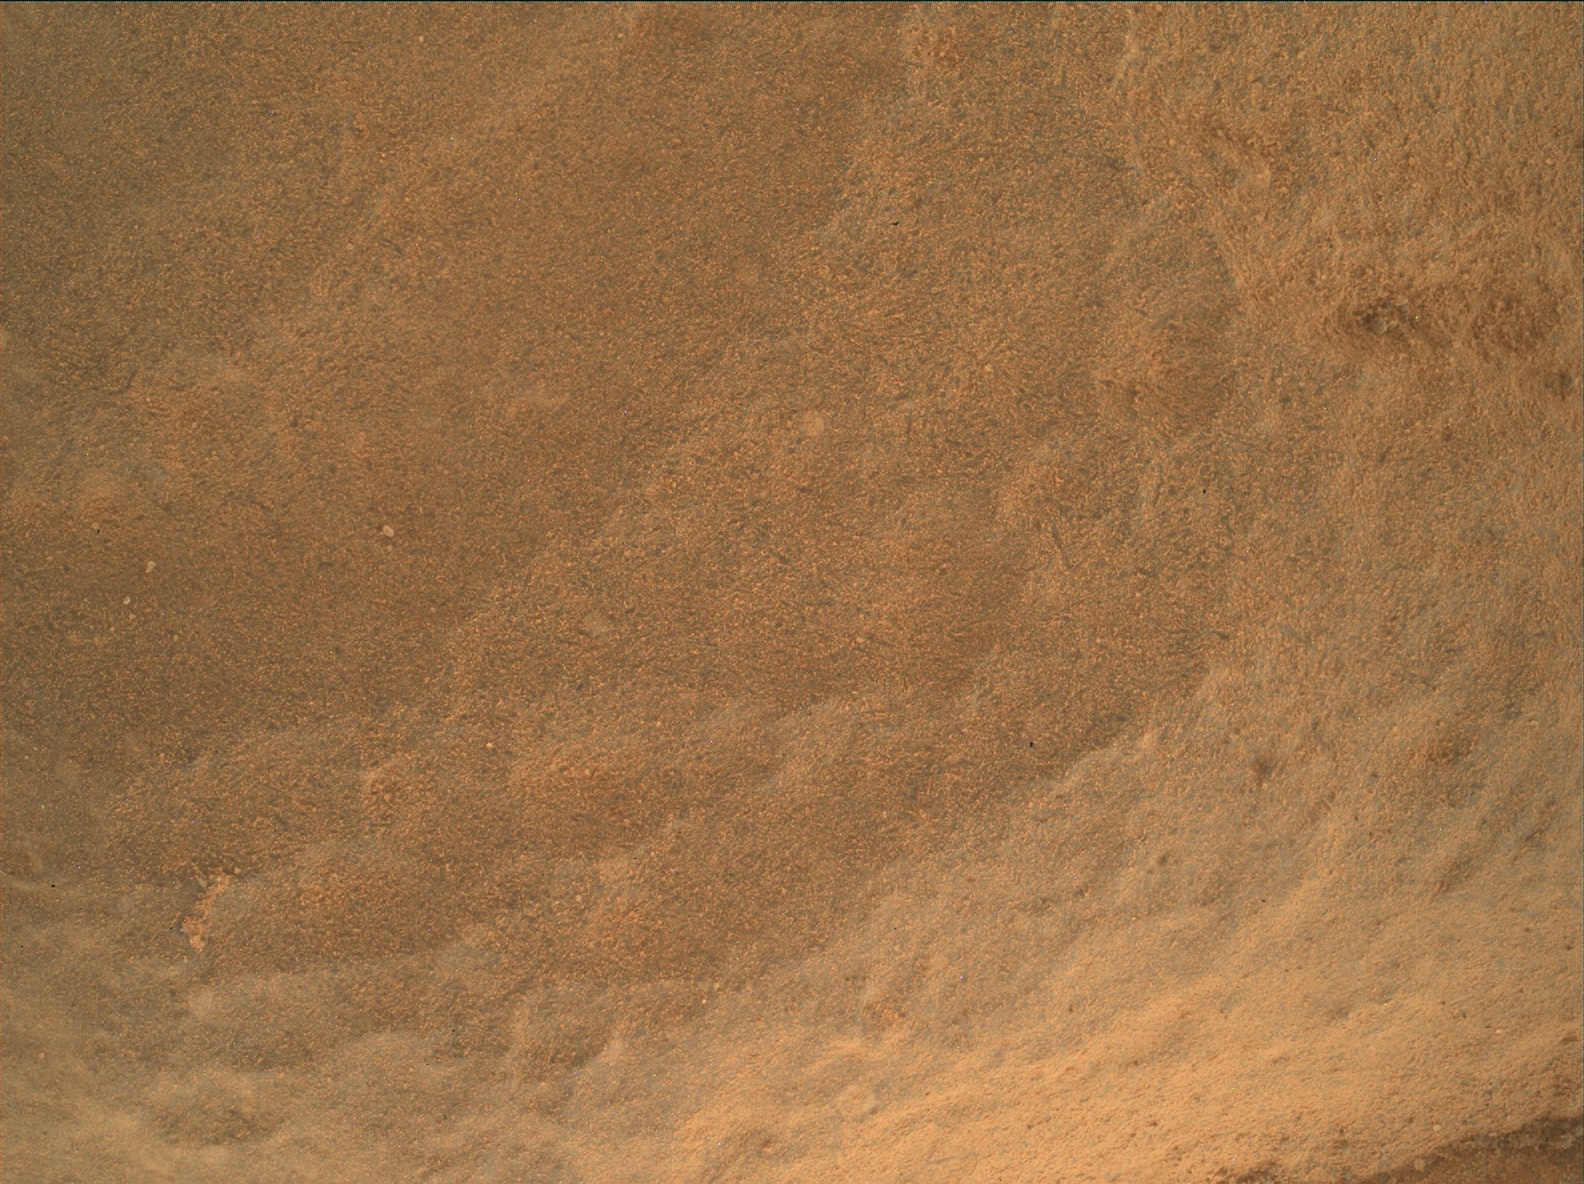 Nasa's Mars rover Curiosity acquired this image using its Mars Hand Lens Imager (MAHLI) on Sol 3415